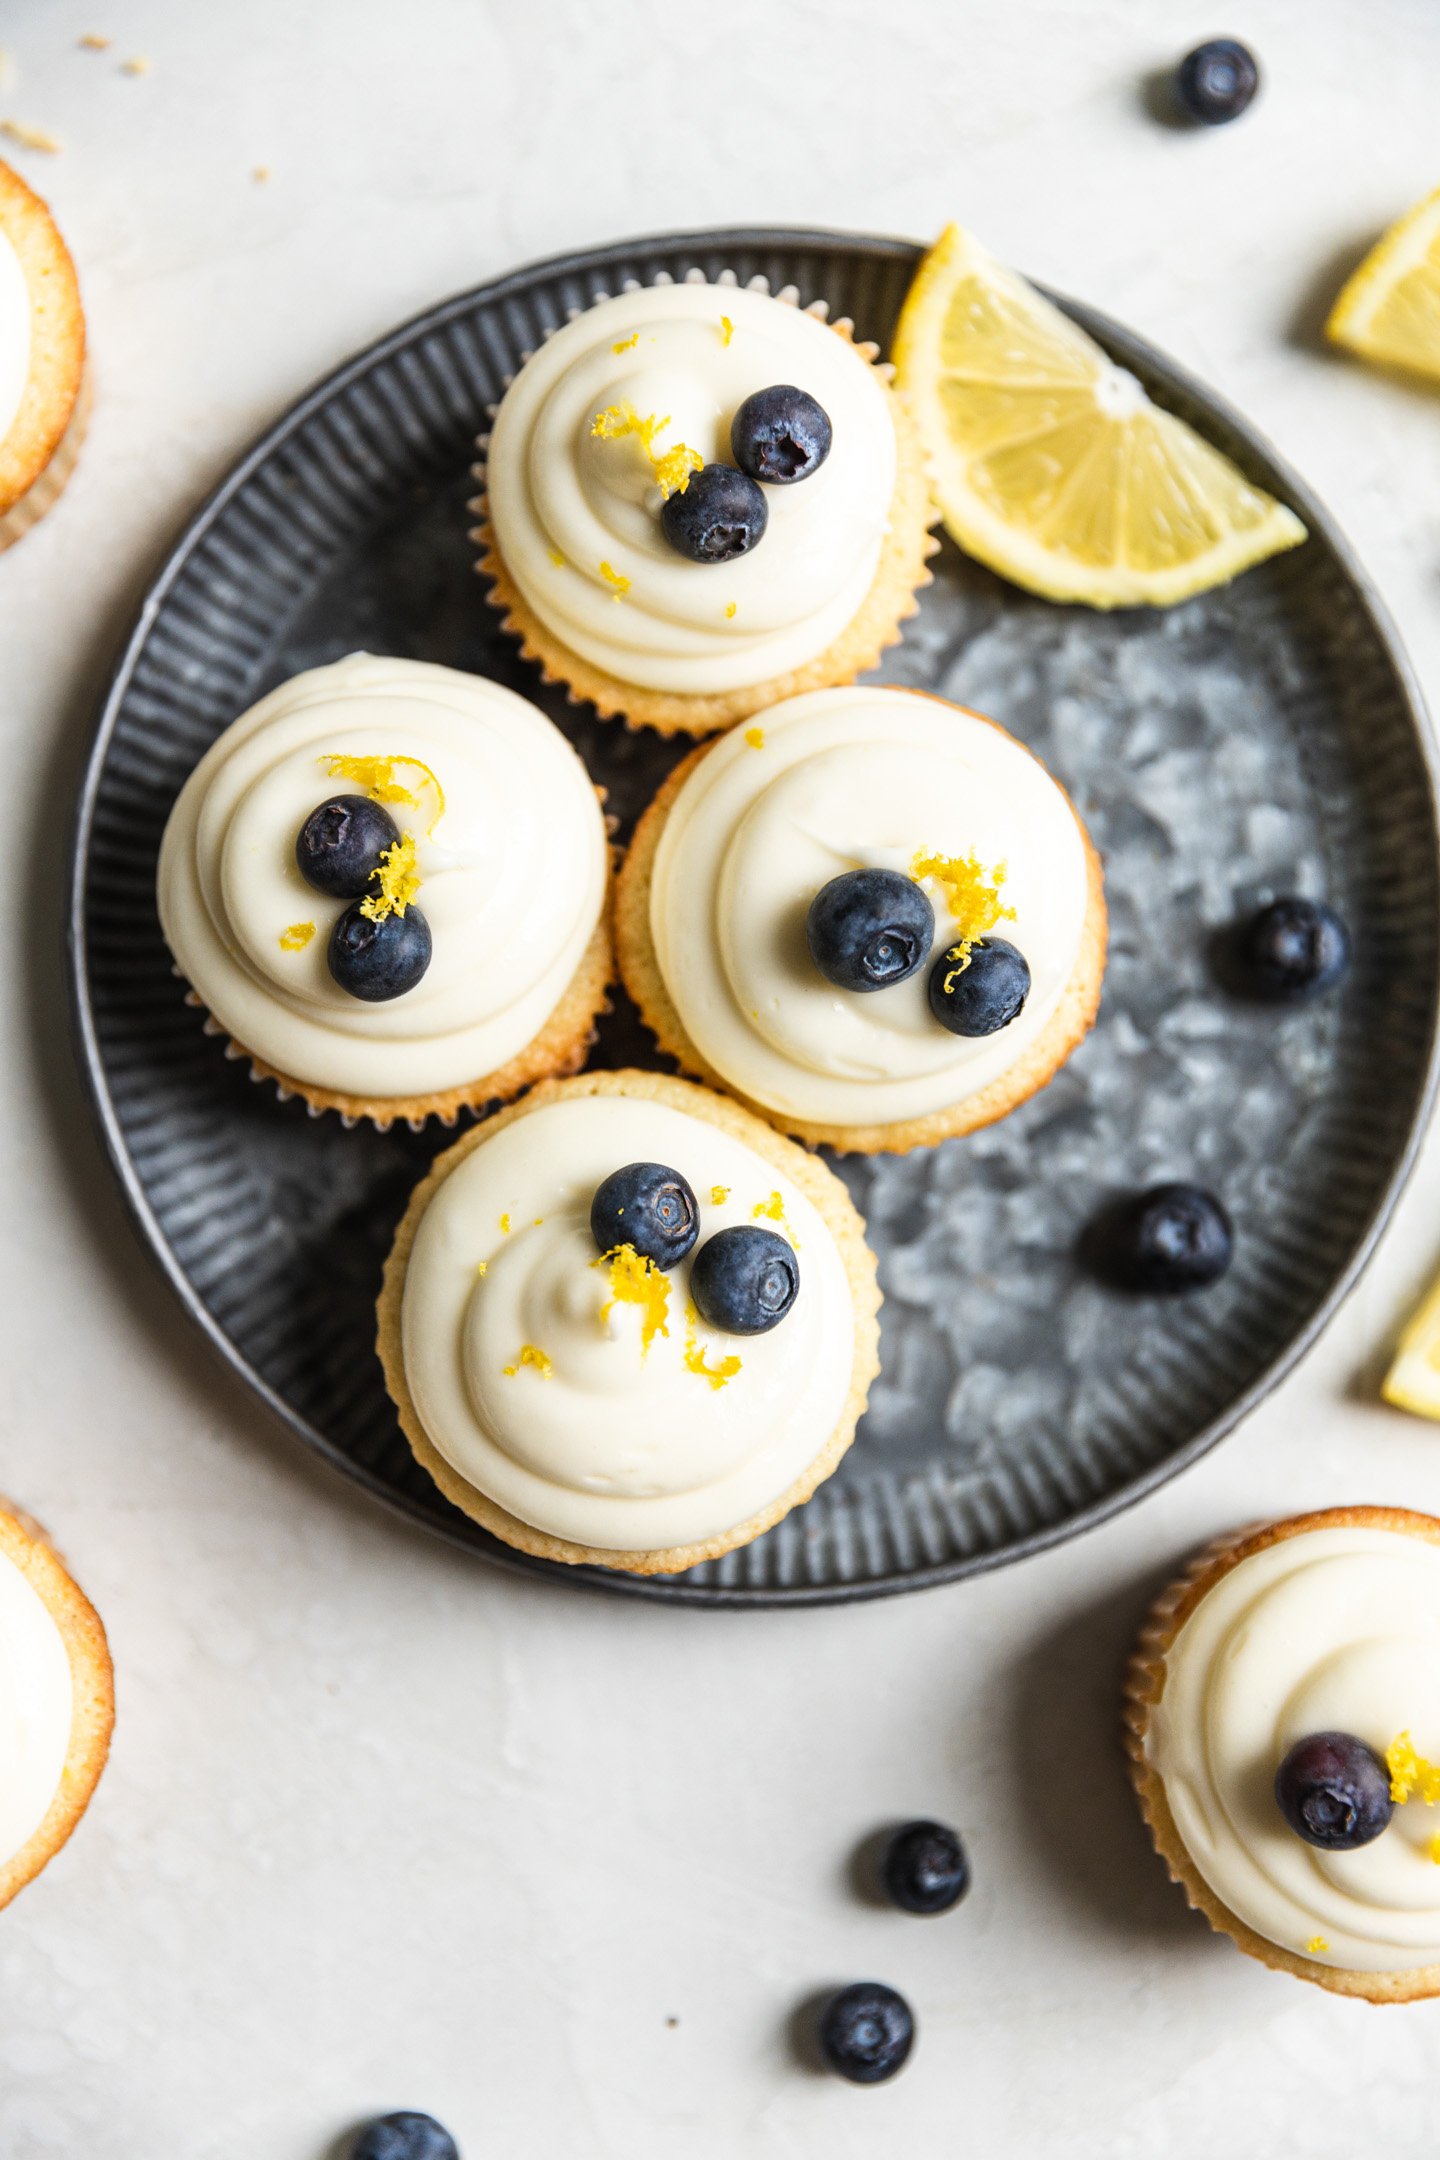 Four lemon blueberry cupcakes on a blue tinted plate with a slice of lemon and blueberries next to them. 